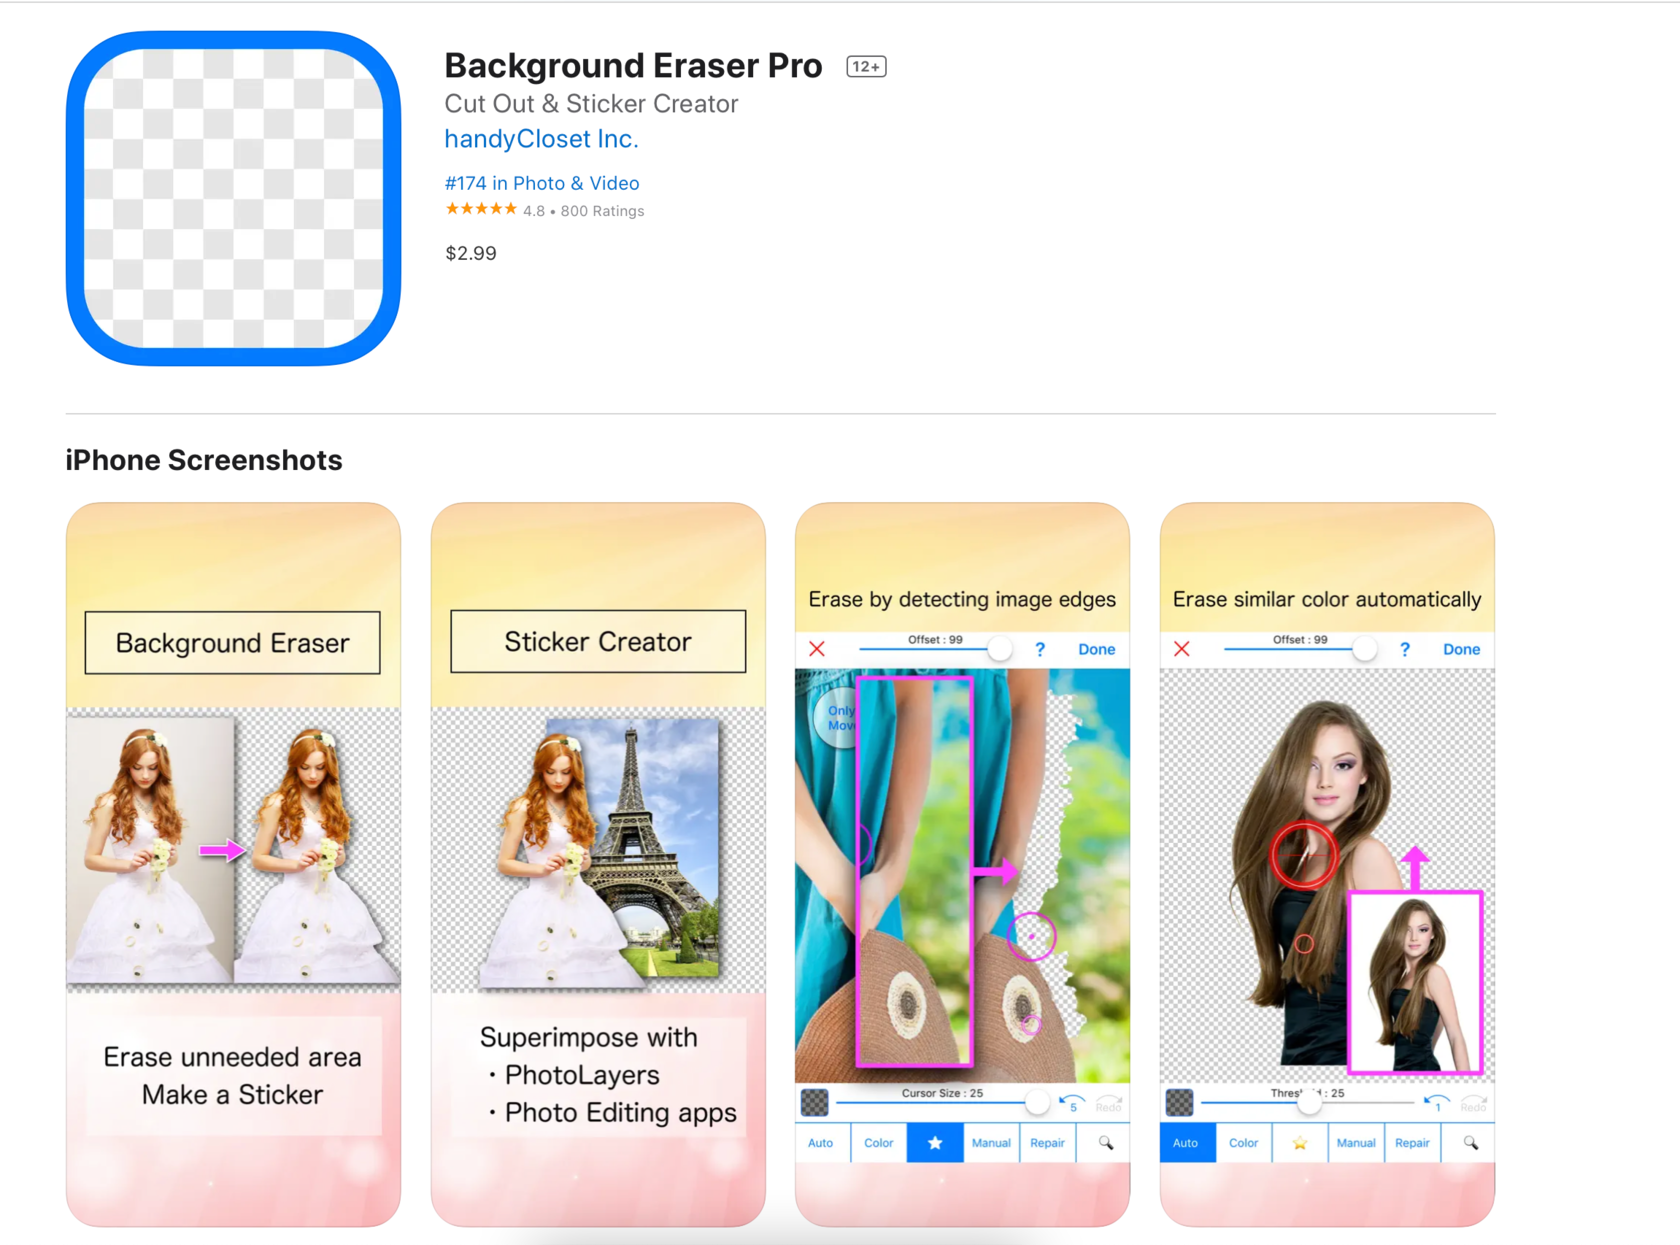 The Best Free Photo Background Changing Apps in 2023 | Skylum Blog